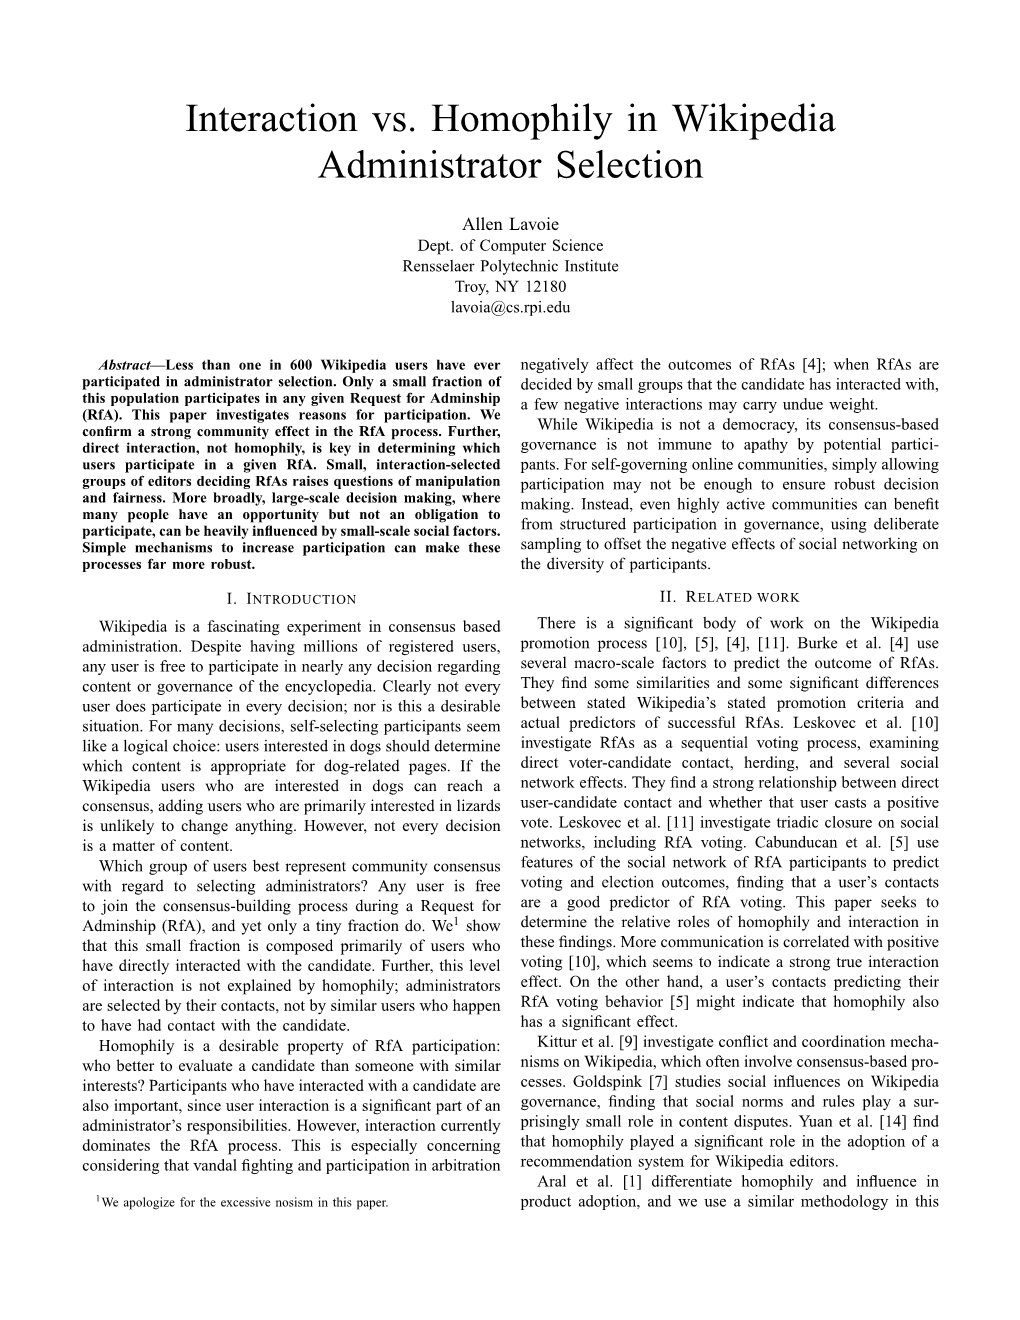 Interaction Vs. Homophily in Wikipedia Administrator Selection